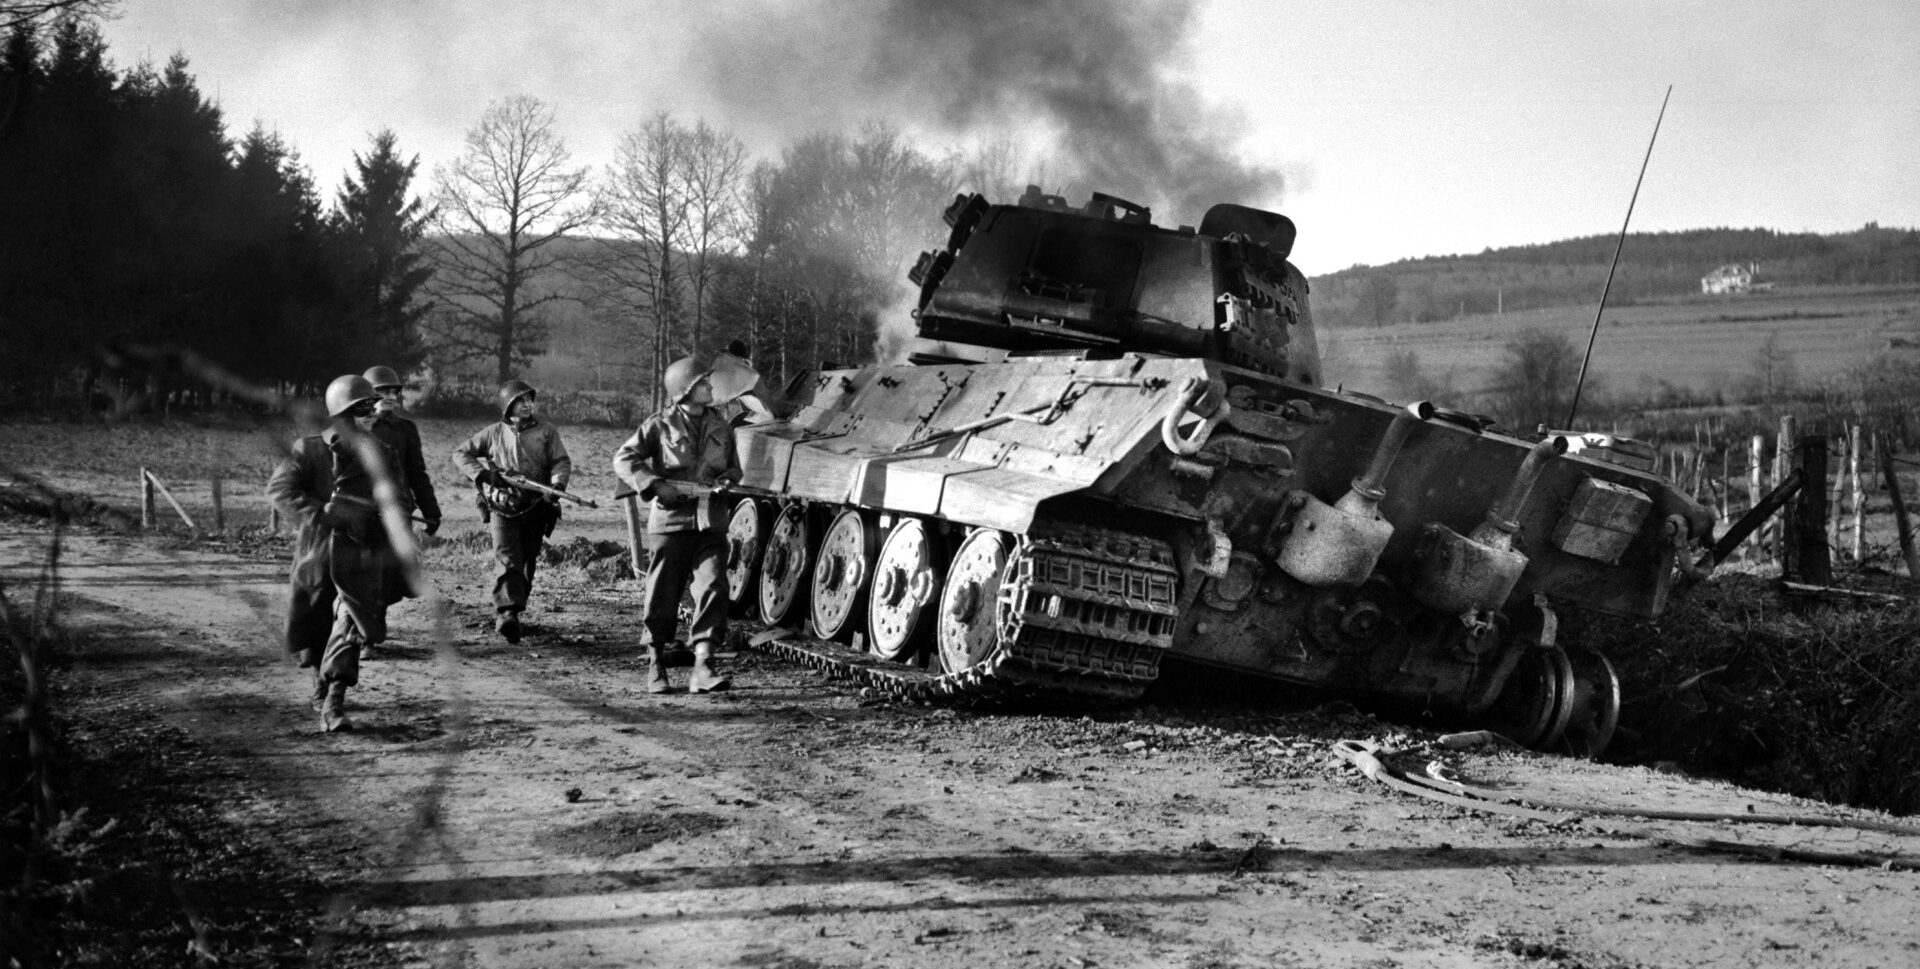 American soldiers inspect a German tank that has been knocked out during the Battle of the Bulge. Despite initial successes, the German advance was stymied as pockets of defenders made heroic stands against the enemy, disrupting the precise German timetable. The initial Intelligence failure, however, cost the Americans dearly in terms of casualties and equipment lost.